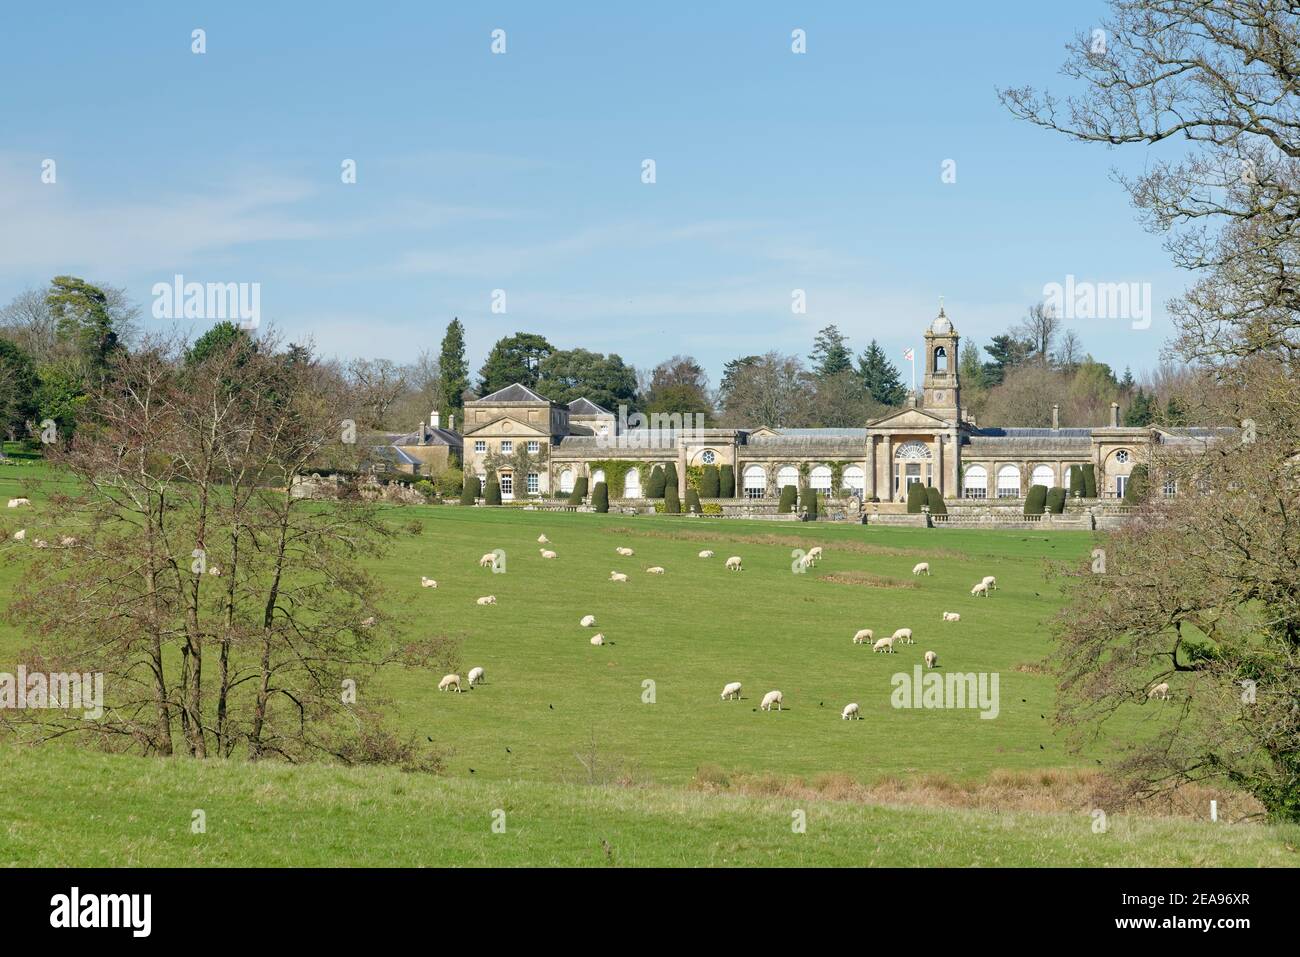 Bowood House and Park, landscaped by Capability Brown, with grazing Domestic sheep (Ovis aries) in the foreground, Derry Hill, Wiltshire, UK. Stock Photo